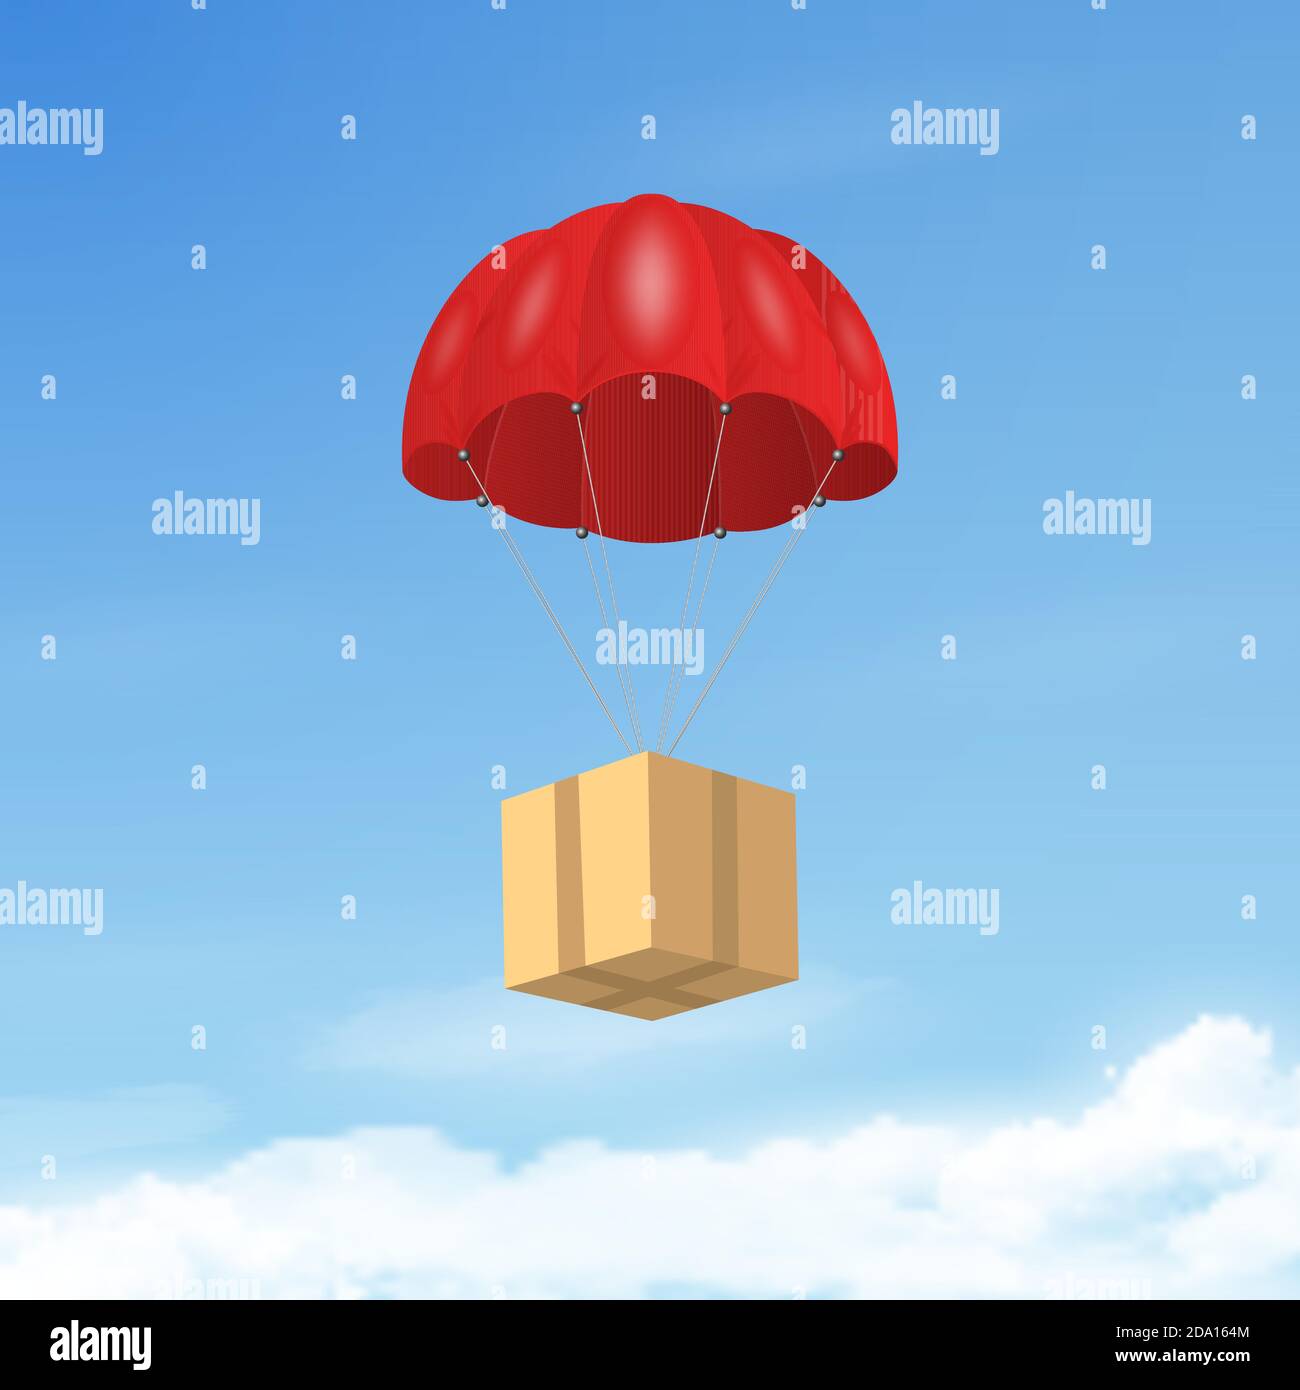 Vector 3d Realistic Red Flying Parachute with Paper Cardboard Boxe on Blue Sky Background. Design Template for Delivery Services, Post, E-Commerce Stock Vector